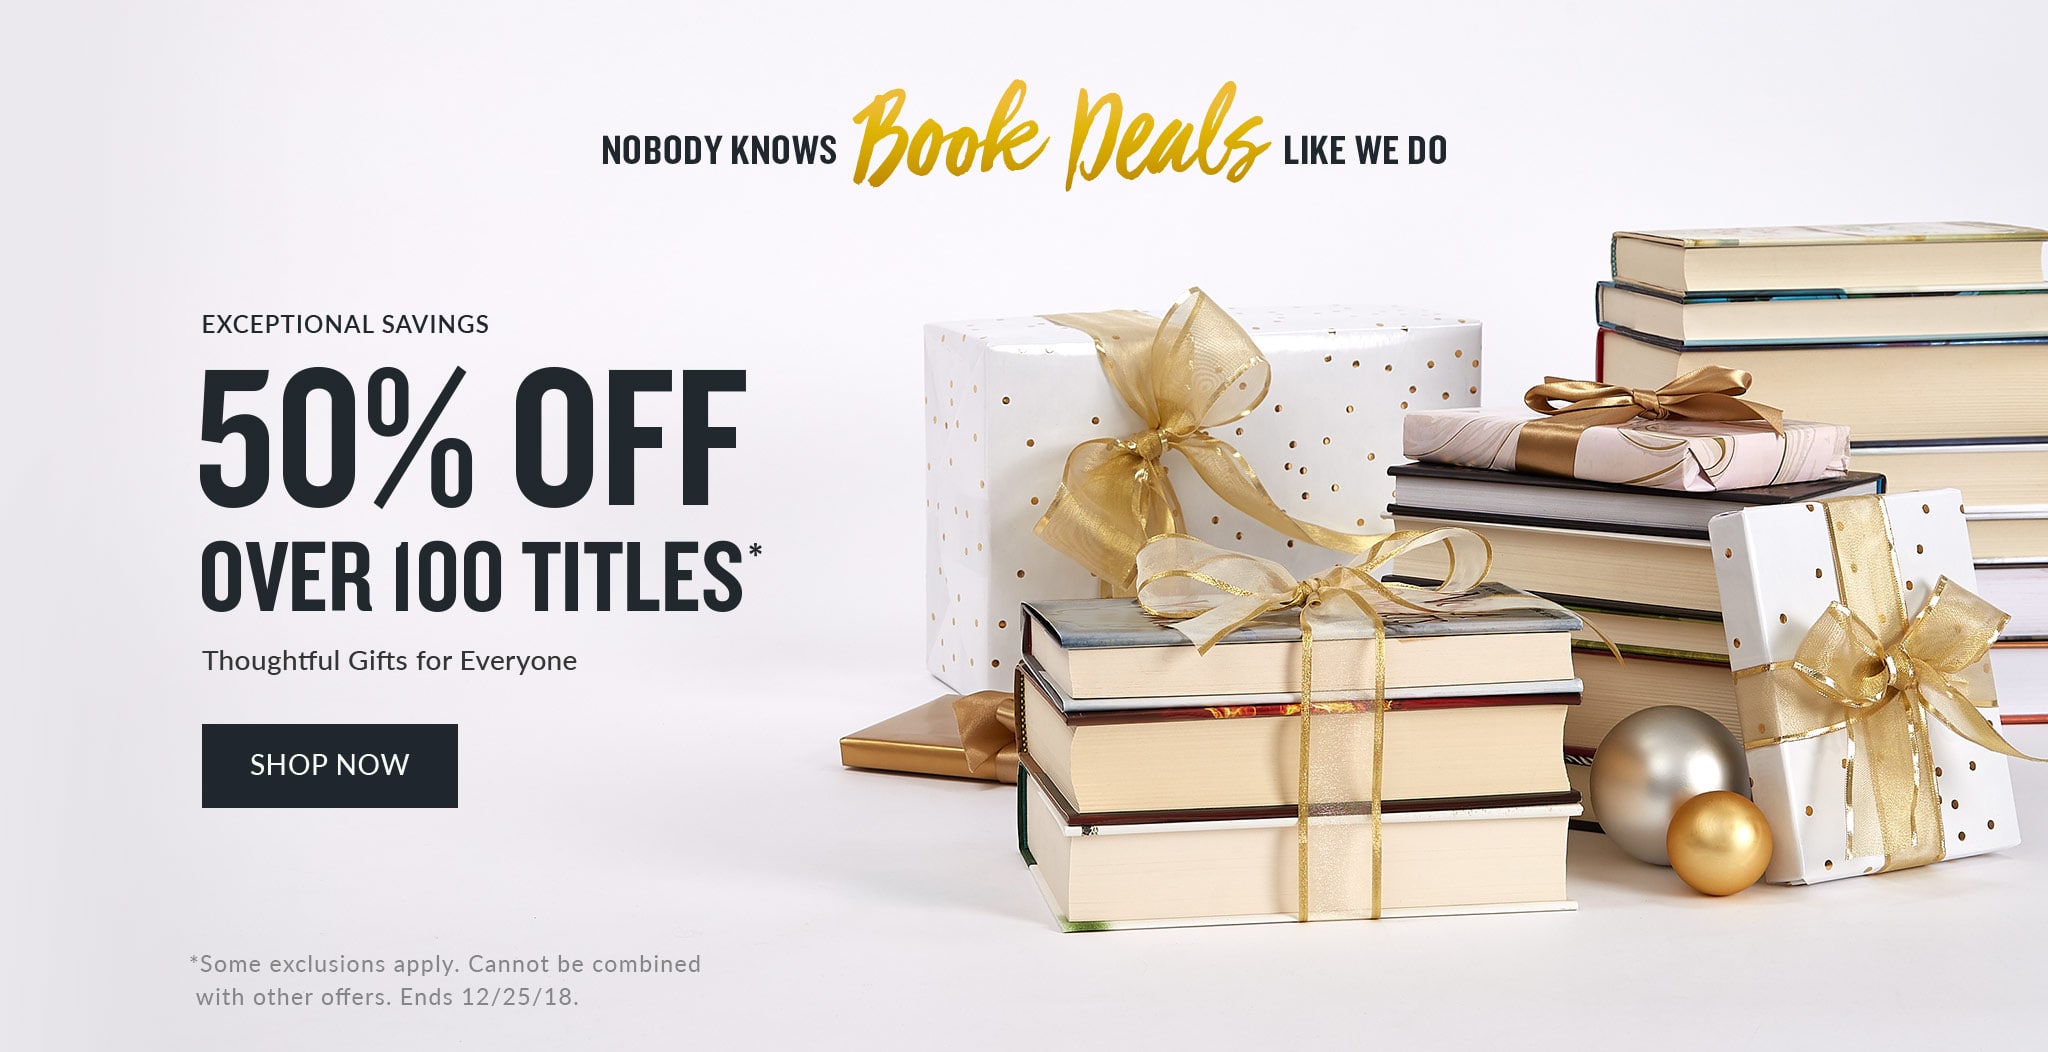 Nobody Knows Book Deals Like We Do   Get 50% off on over 100 books! Some exclusions apply. Cannot be combined with other offers. Ends 12/25/18.  Shop Now 